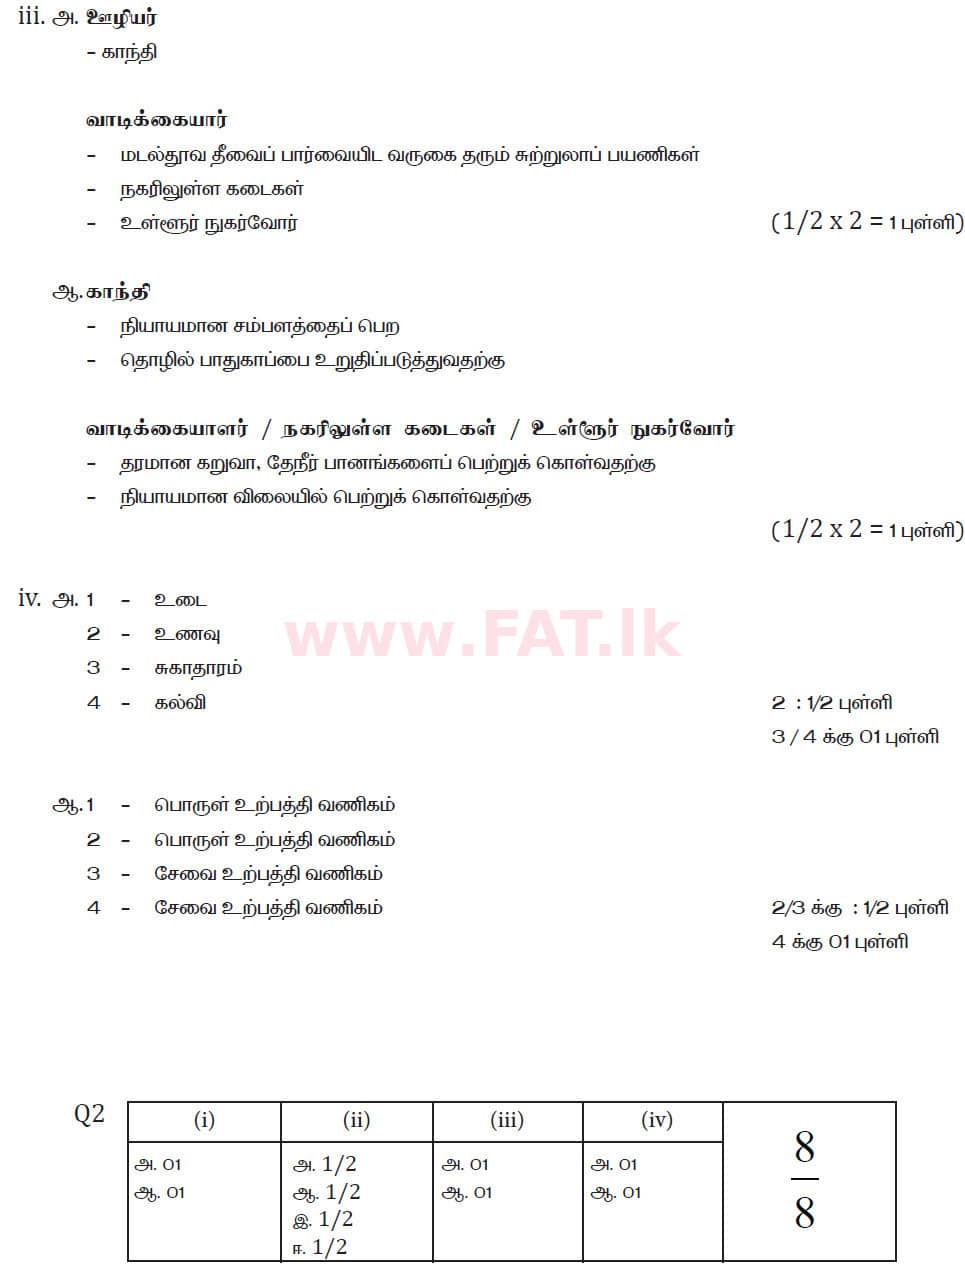 National Syllabus : Ordinary Level (O/L) Business and Accounting Studies - 2019 March - Paper II (தமிழ் Medium) 2 5983